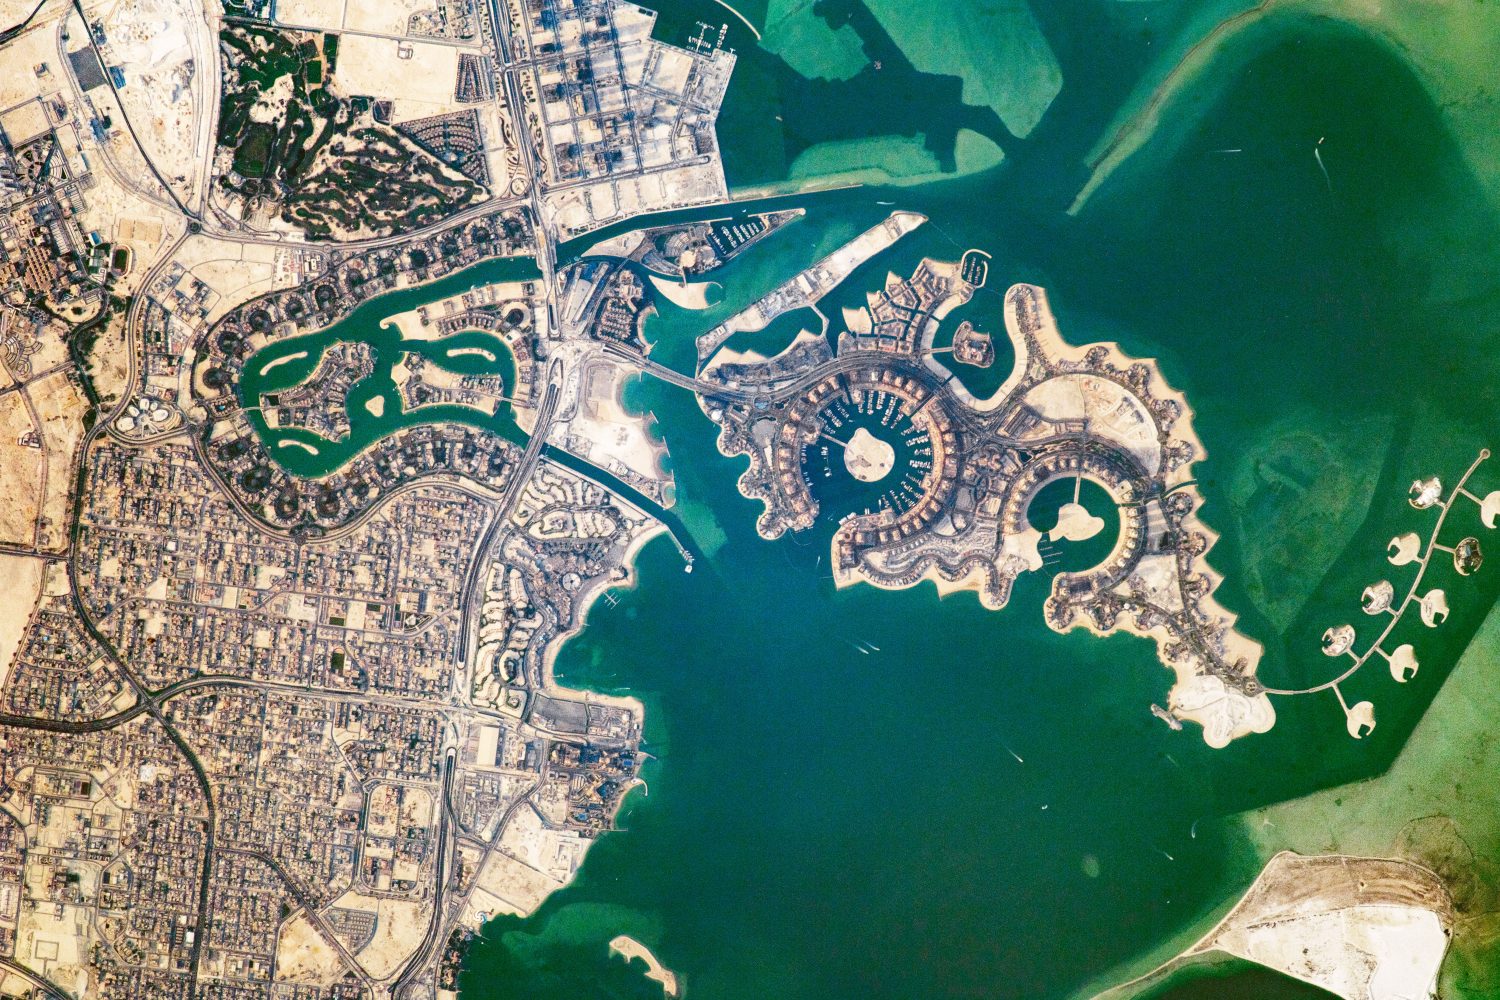 artificial islands off the coast of Qatar were made possible by abundant oil and natural gas reserves